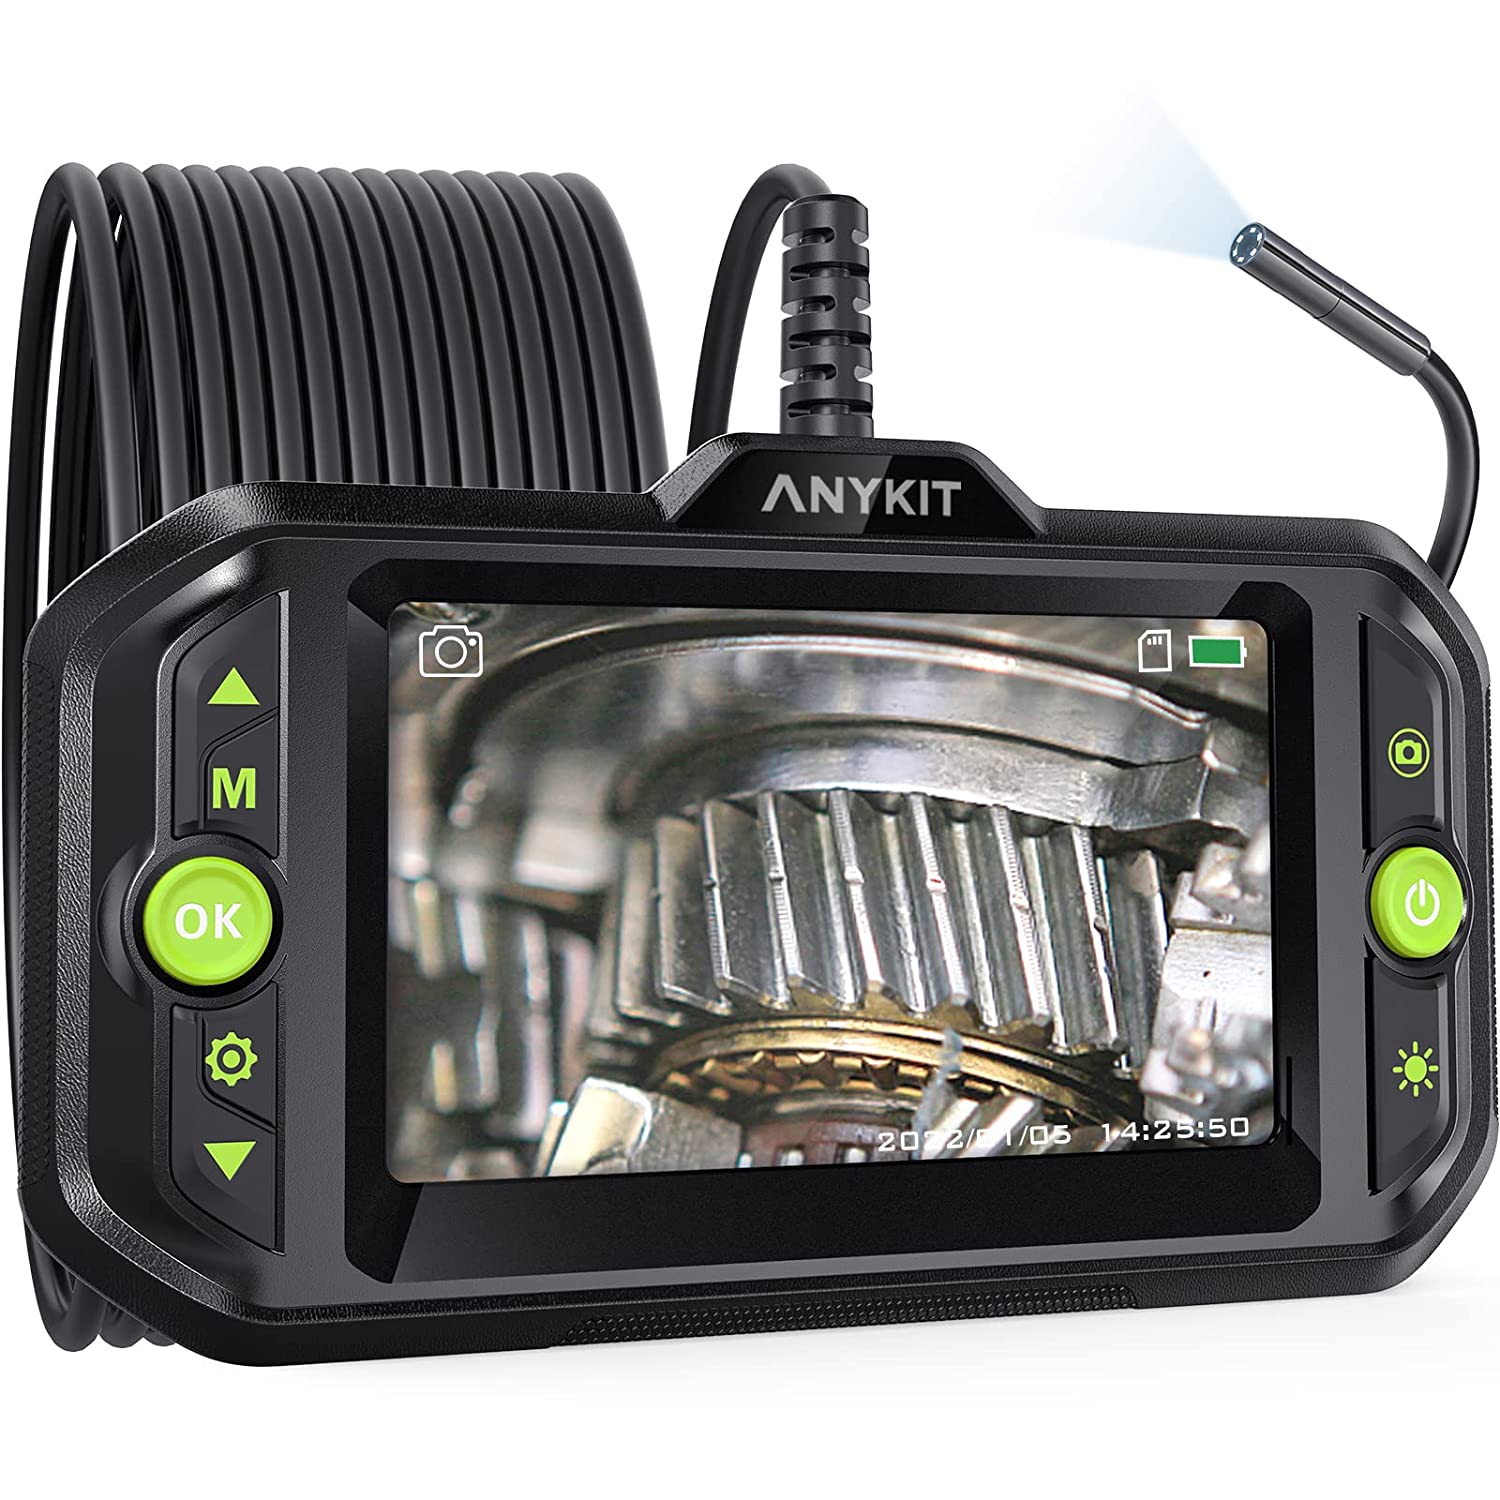 Anykit Endosocope Inspection Camera, 1080P HD Borescope with 6 LED Lights, Color LCD Screen, 16.4ft Upgraded Semi-Rigid Metal Gooseneck Camera Porbe,32G TF Card